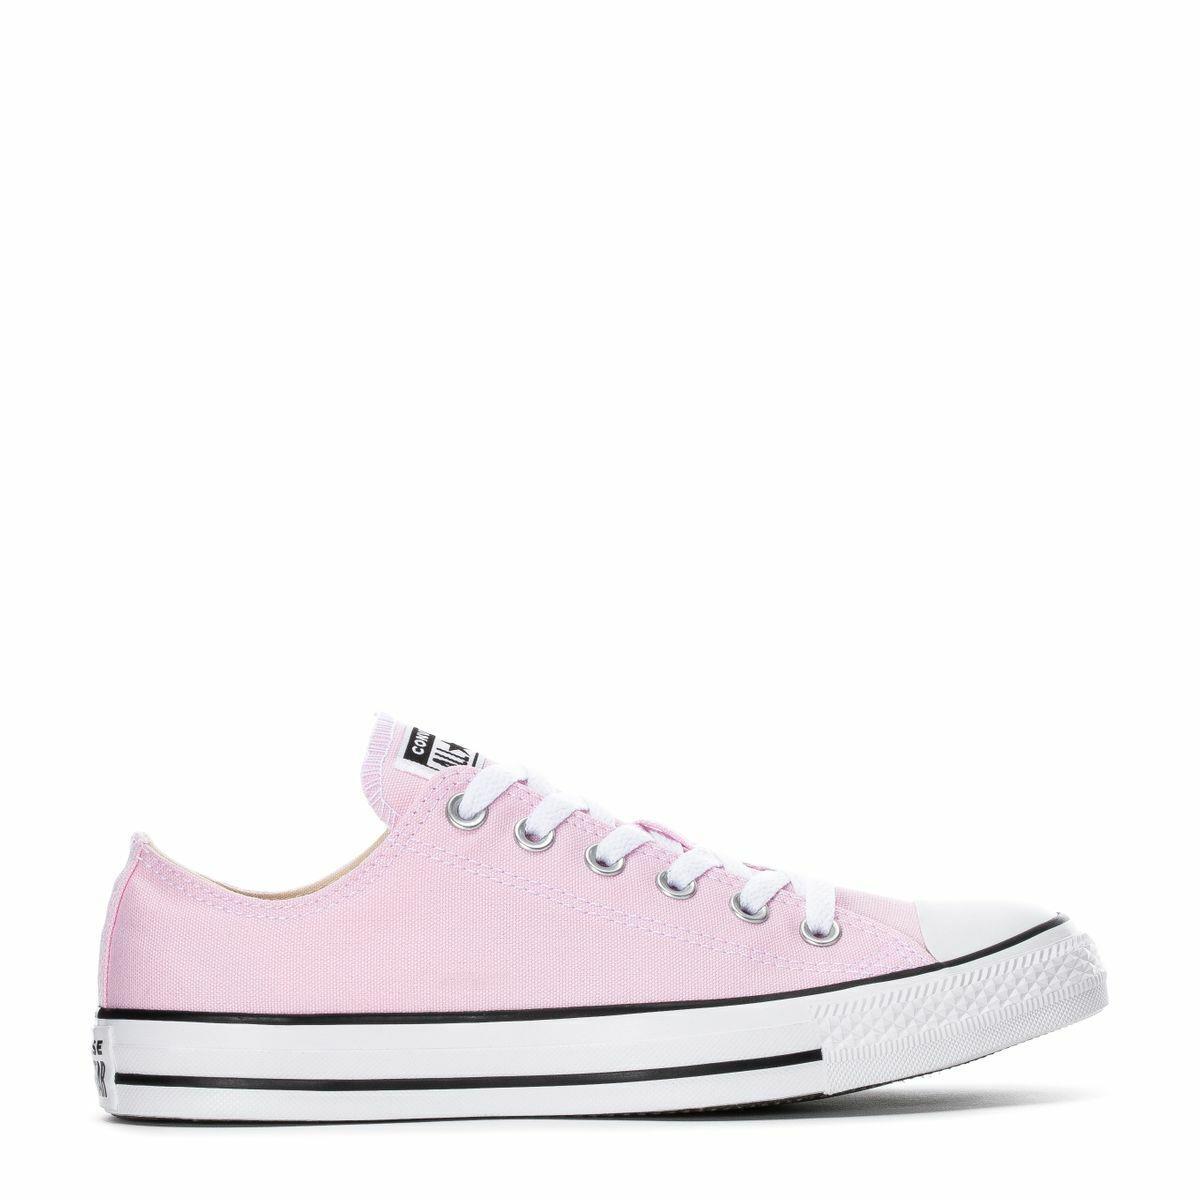 Men`s Converse Ctas OX Athletic Fashion Sneakers 163358F - Pink